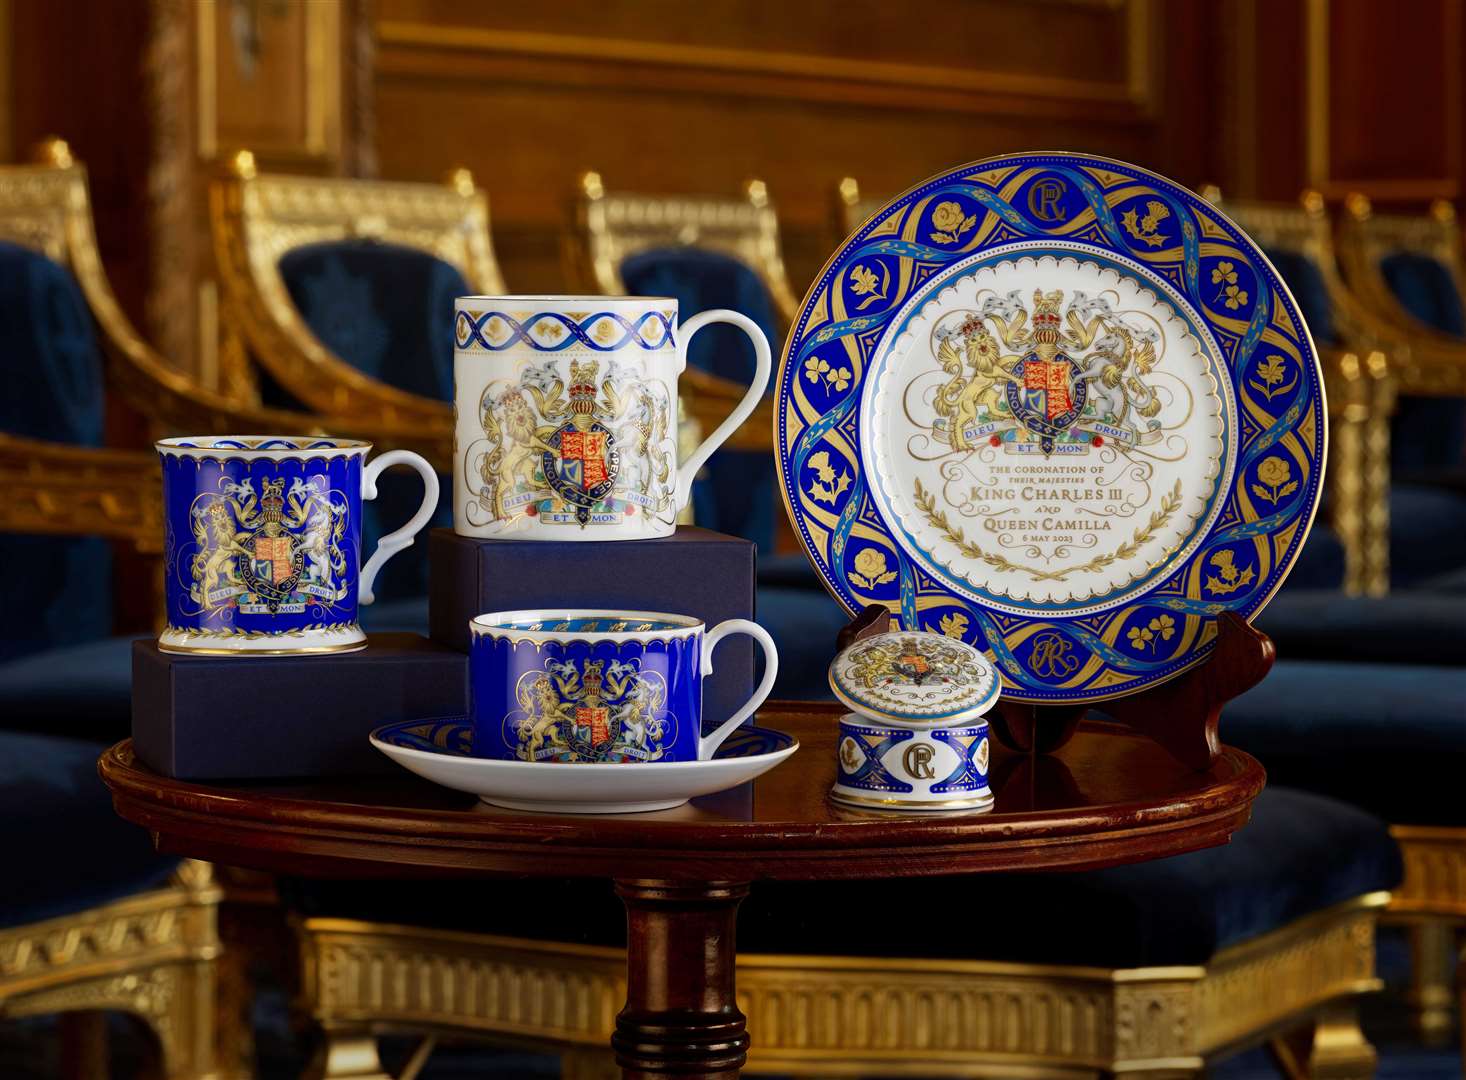 The official coronation chinaware has been unveiled by the Royal Trust ahead of the coronation in May